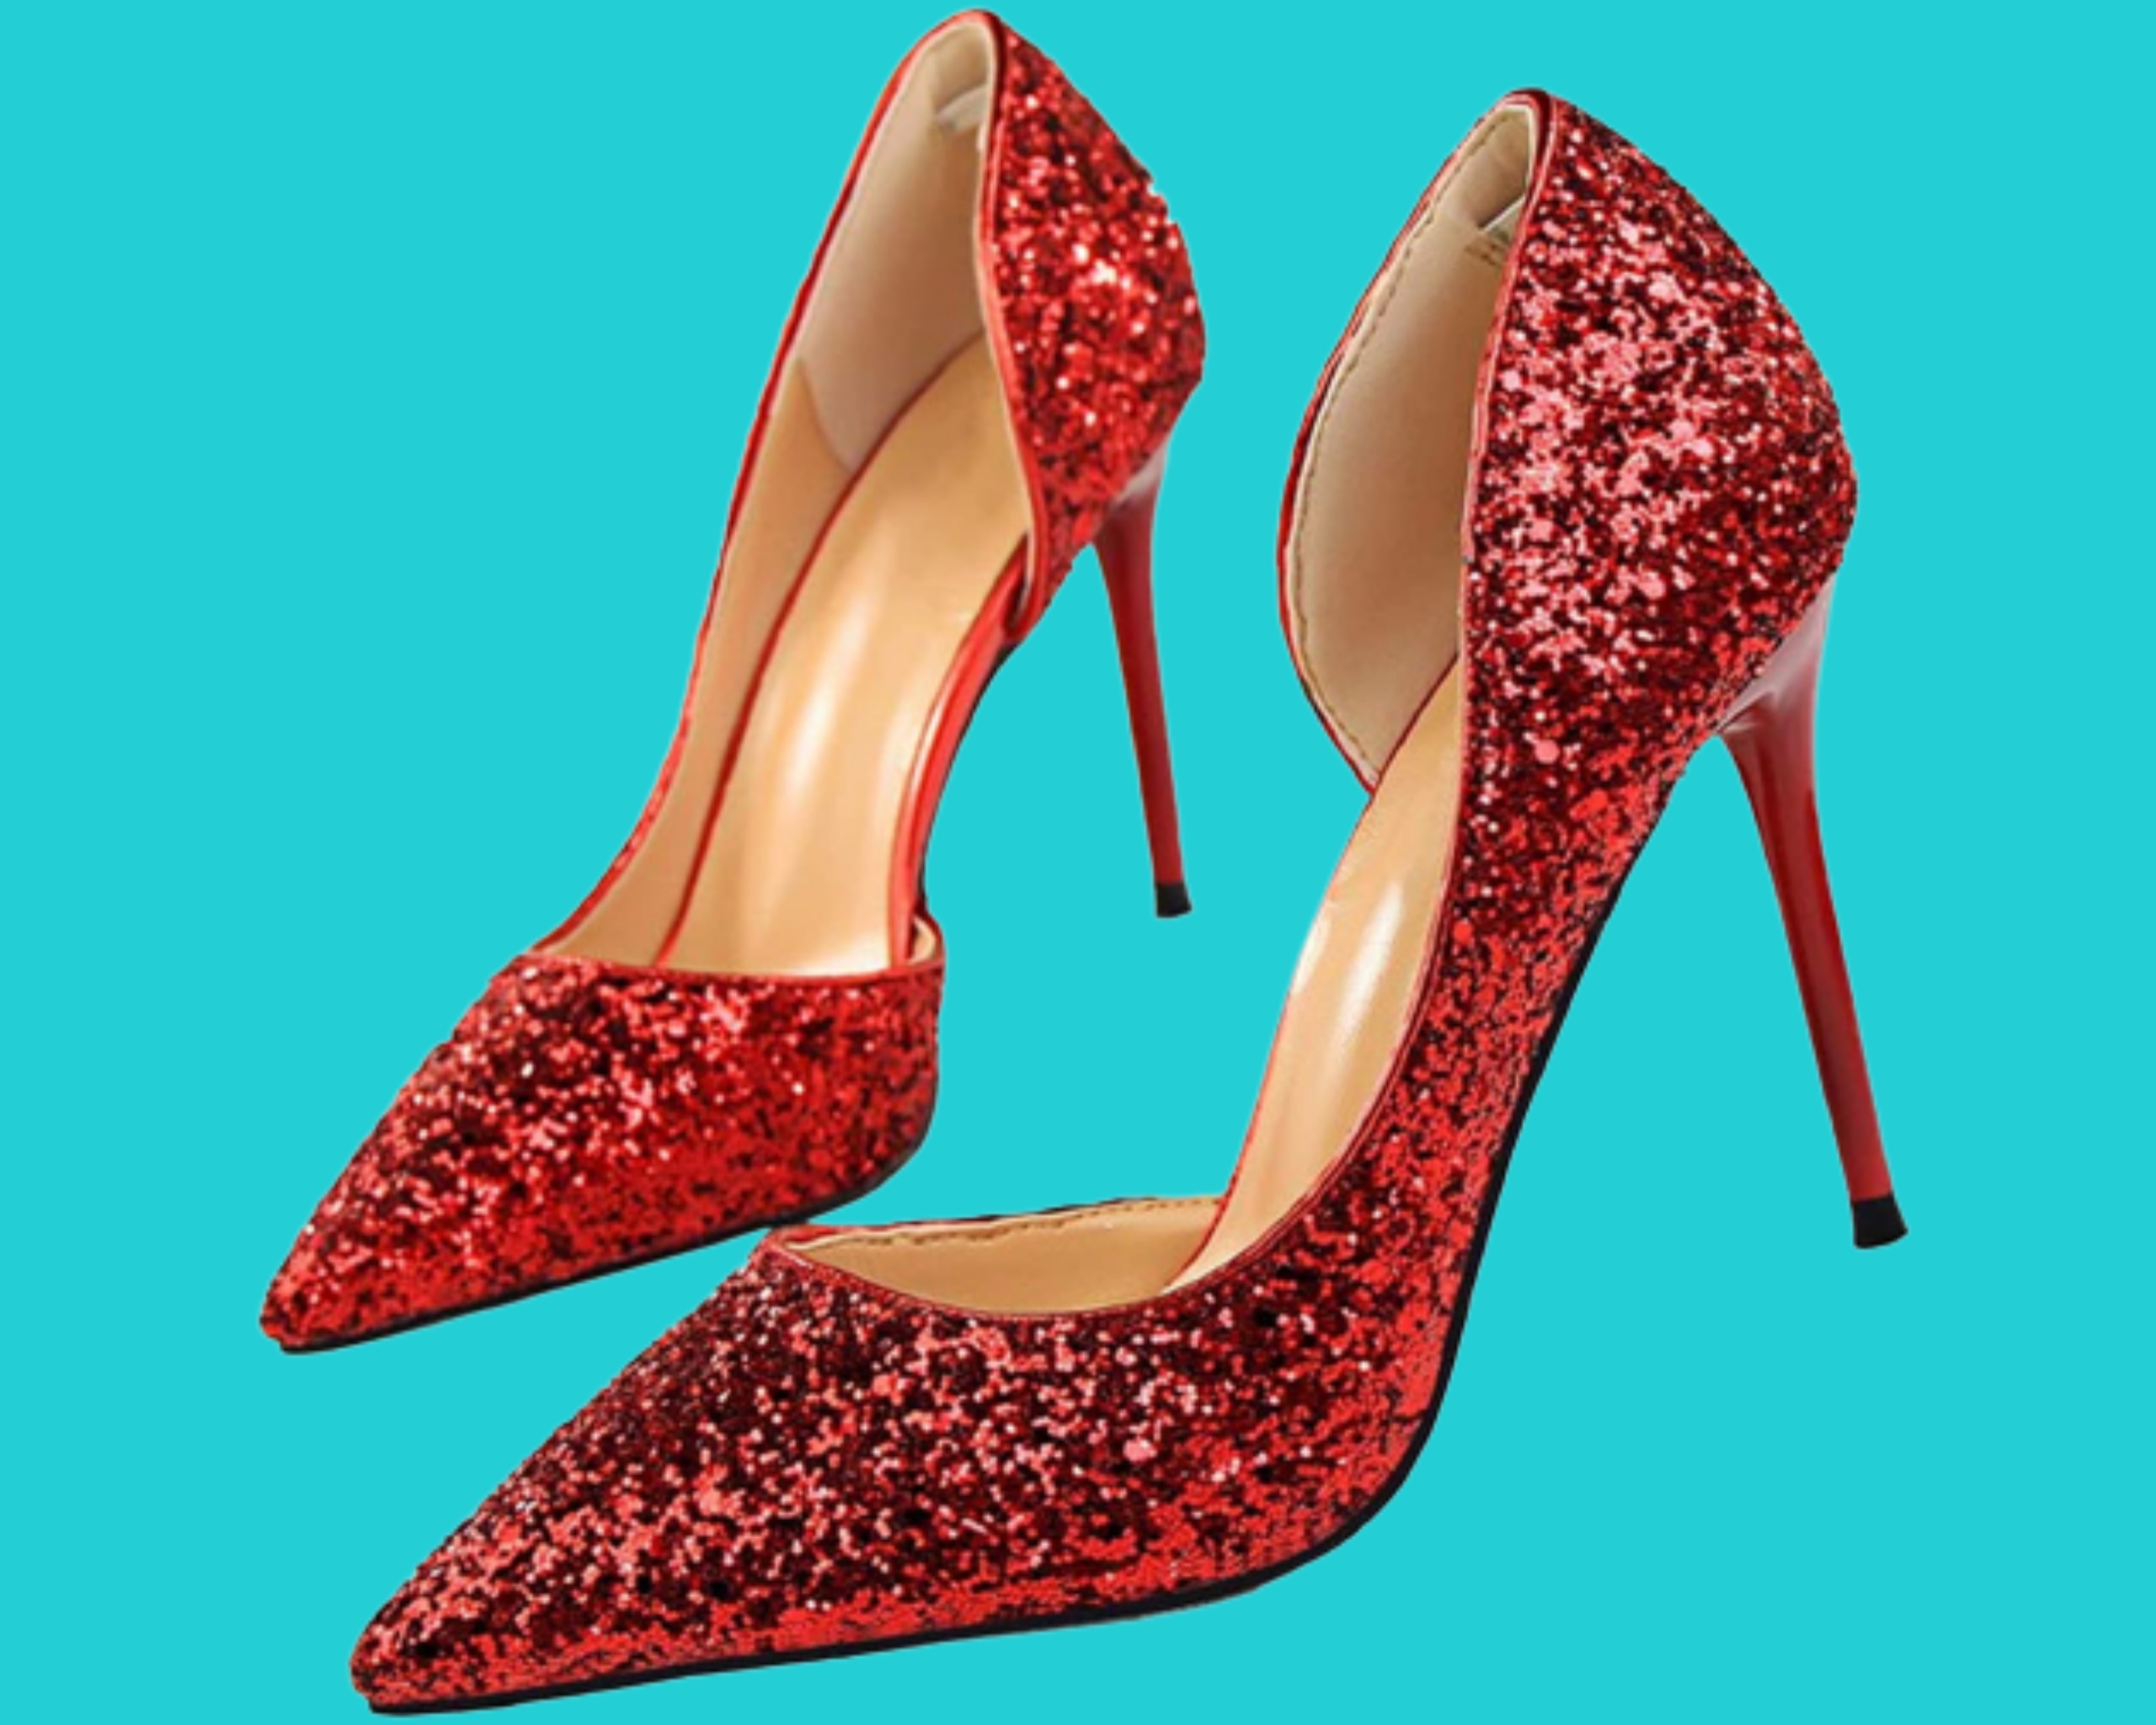 Comfortable stiletto for party